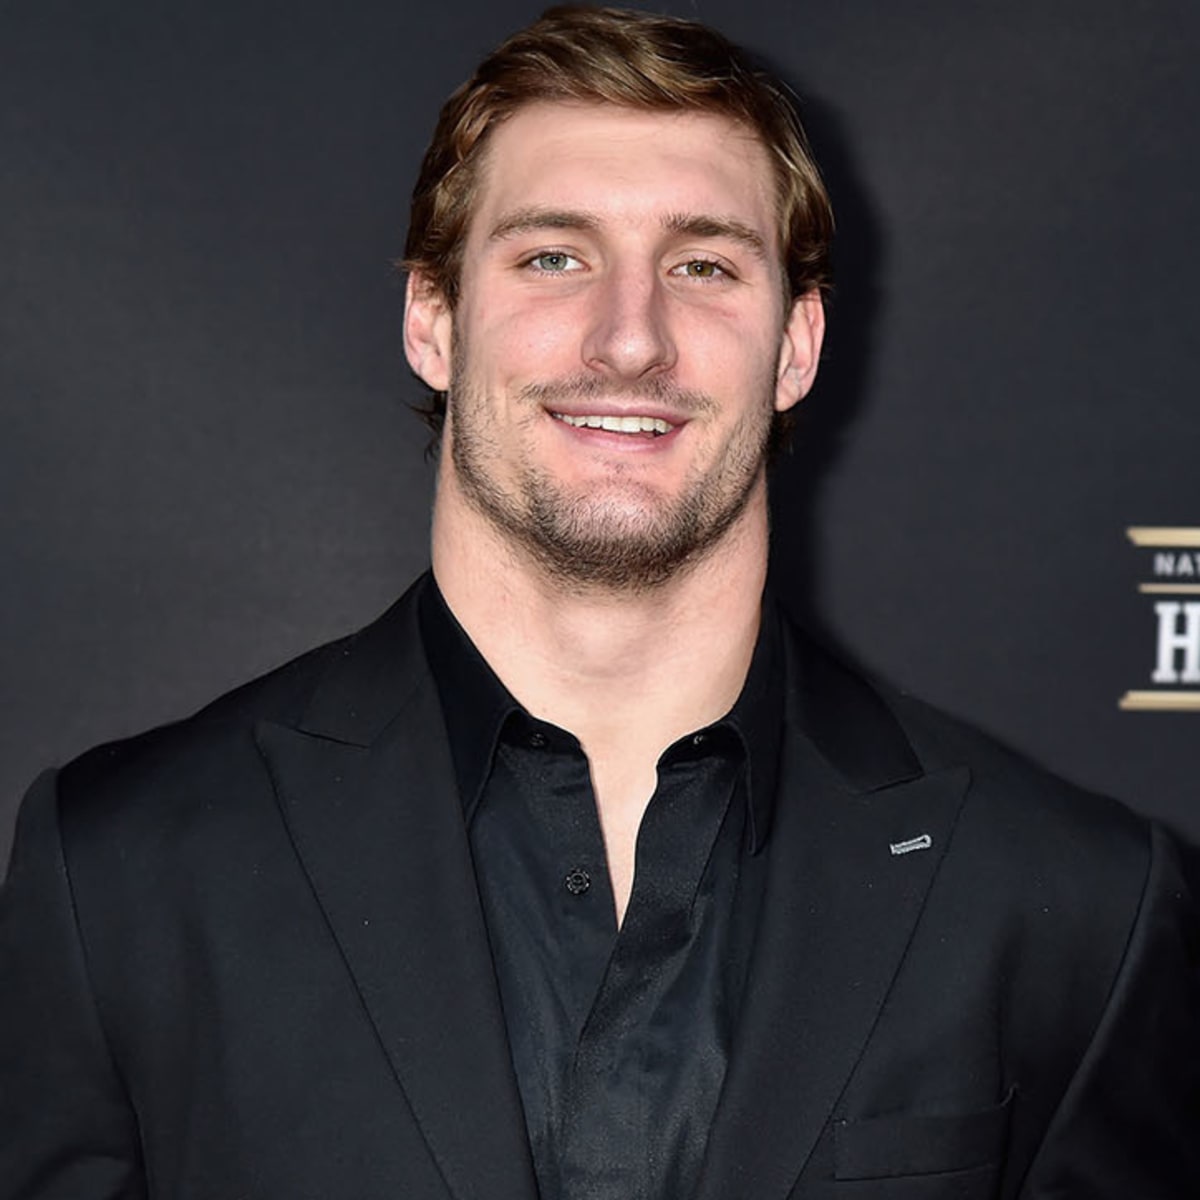 From GoT to GOAT: Joey Bosa's Impending Stardom Has No Limits